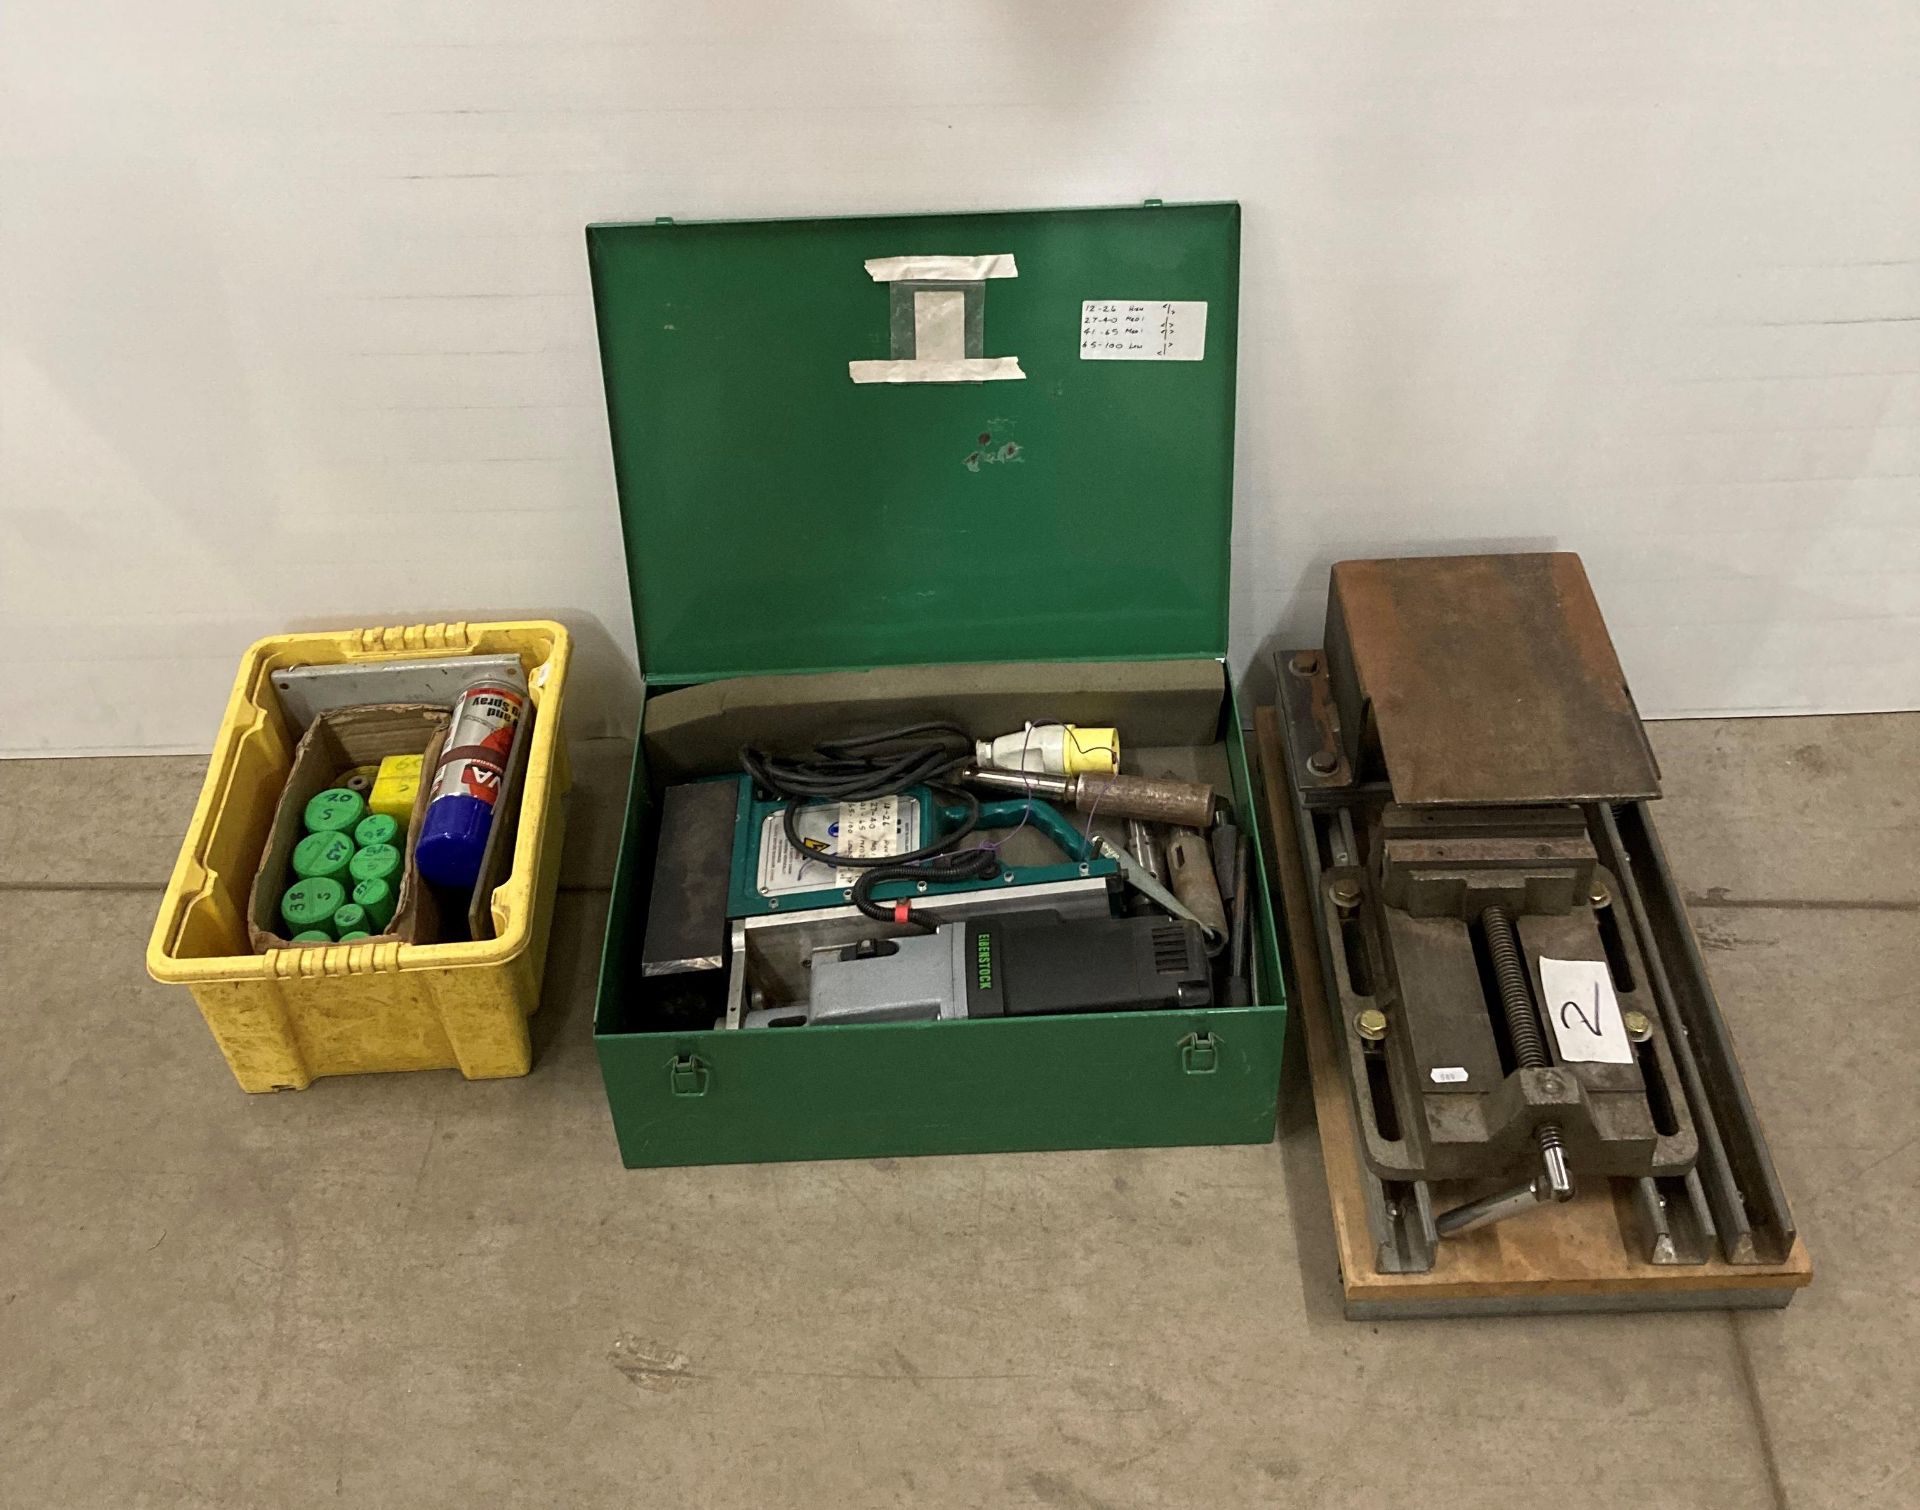 EIBENSTOCK EHB 110V MAG DRILL WITH METAL PACE UNIT AND ACCESSORIES (saleroom location: H08)